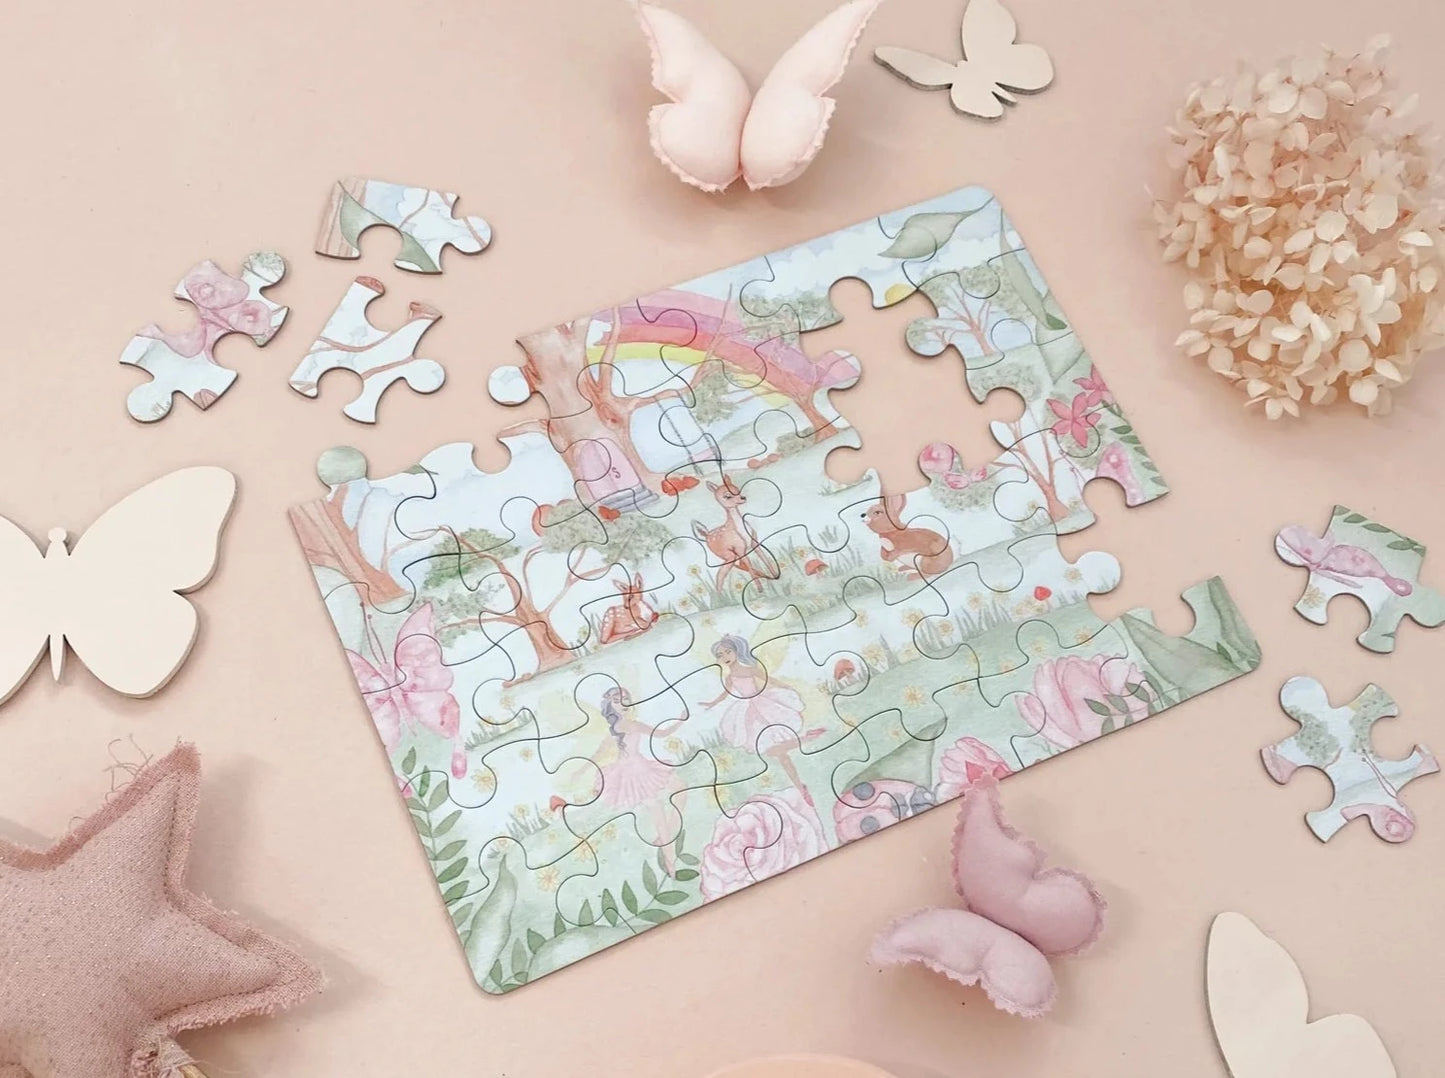 The Enchanting Puzzle